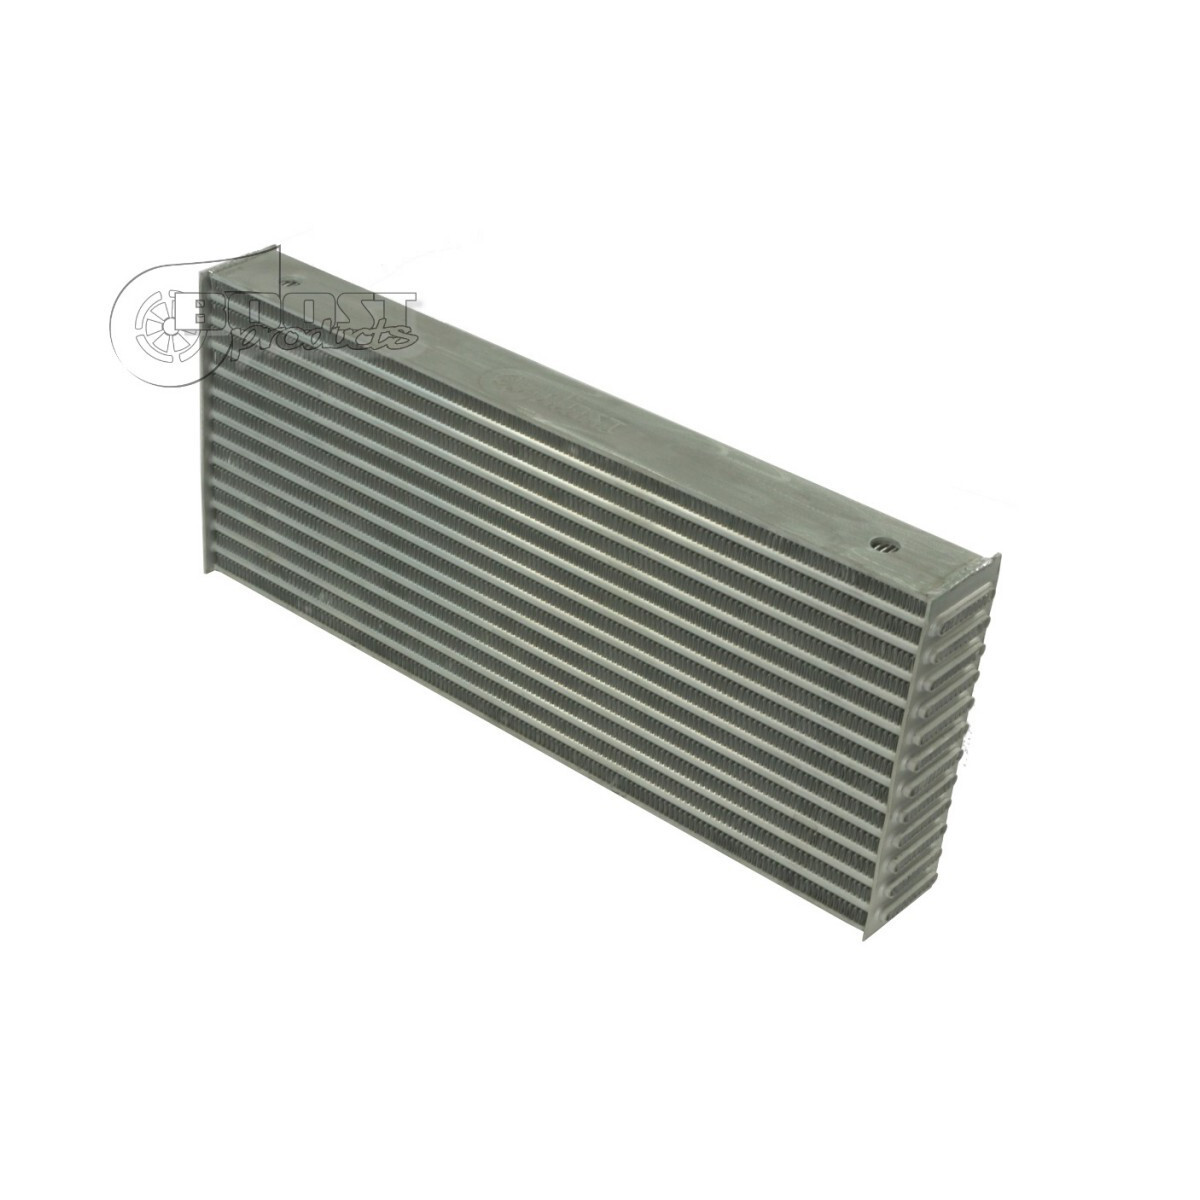 BOOST products intercooler core 550x230x65mm